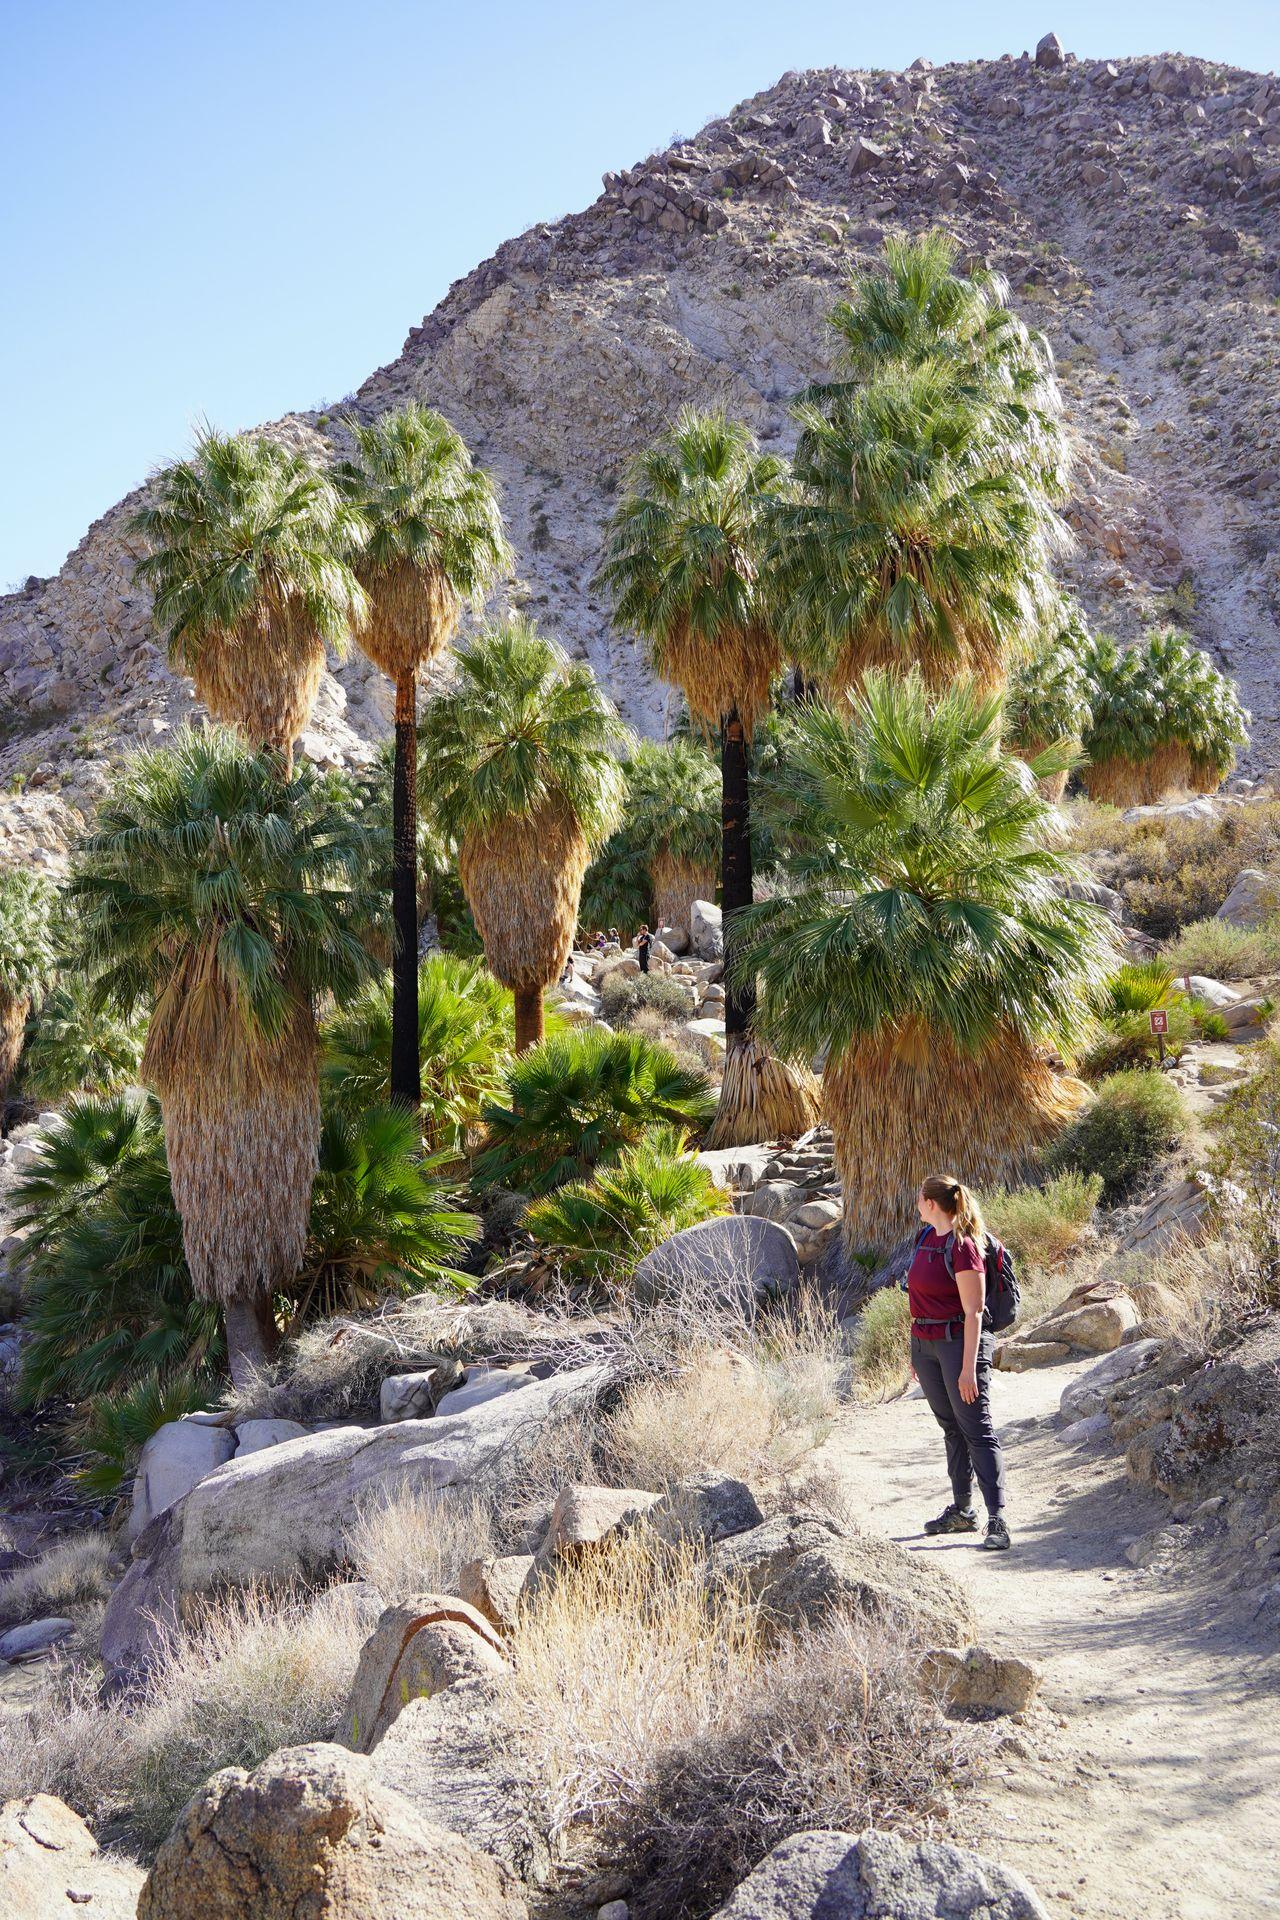 Lydia standing next to an area of tall palm trees on the FortyNine Palms Oasis trail.